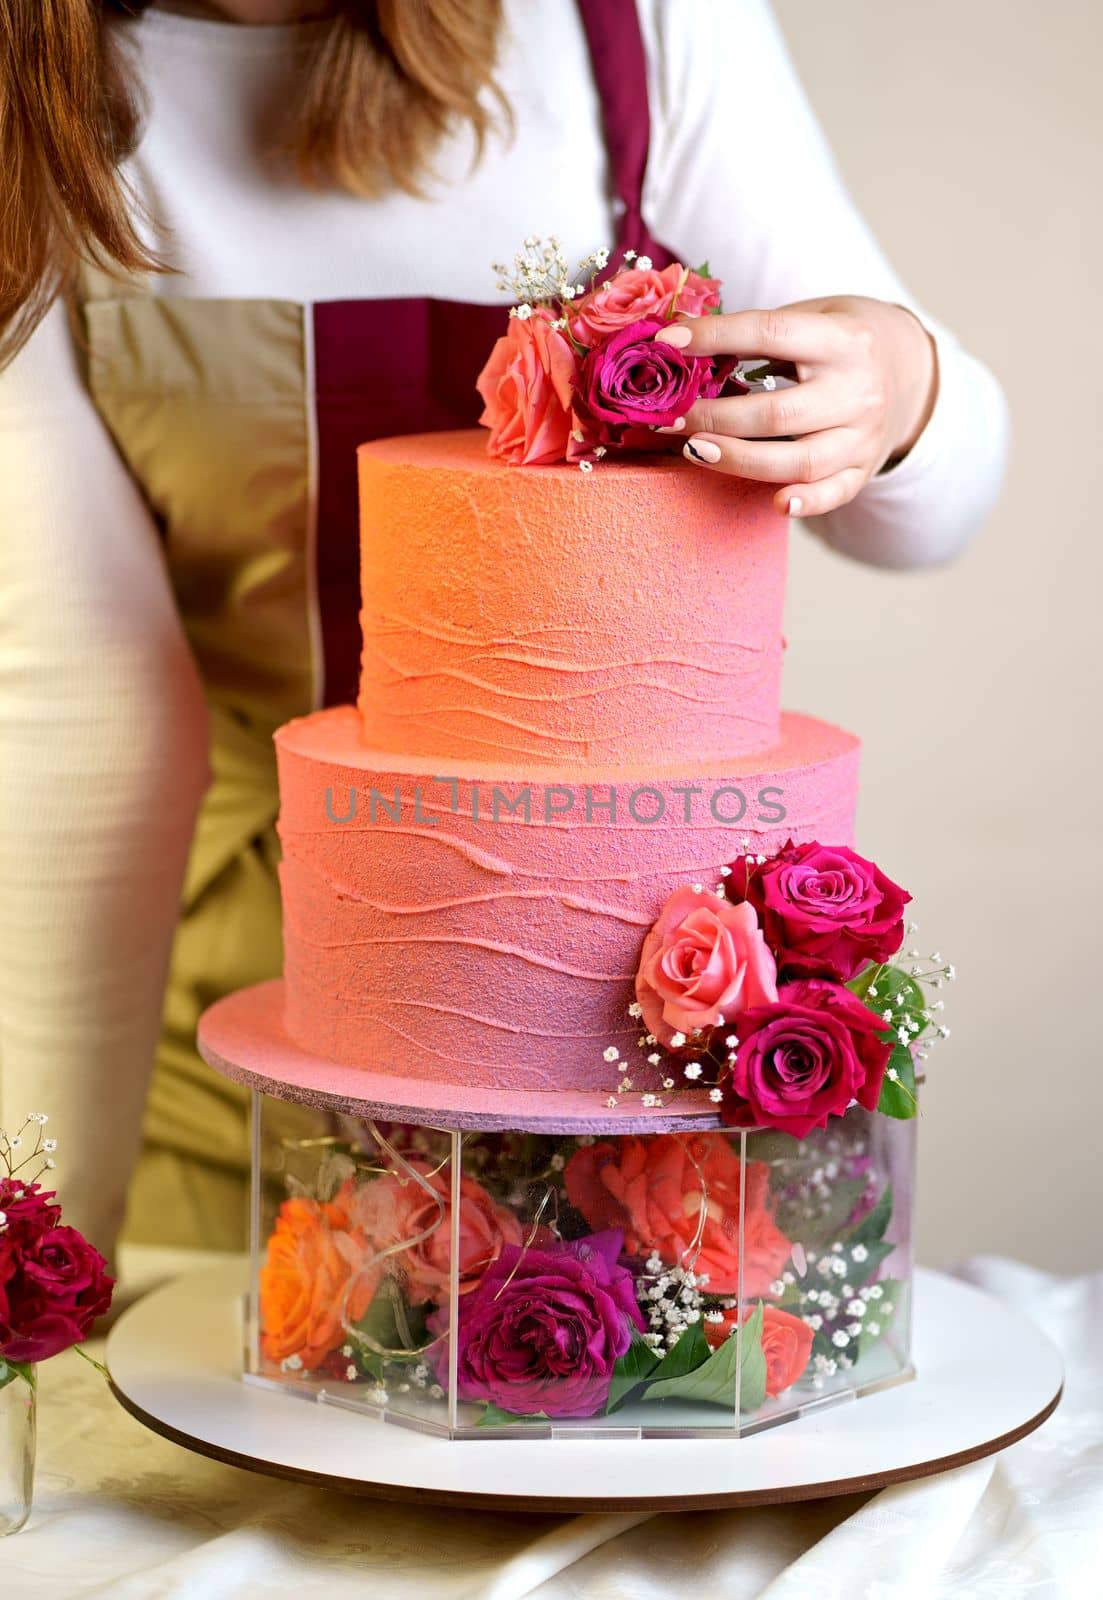 Beautiful girl confectioner in a working apron decorates a birthday cake with fresh flowers by aprilphoto